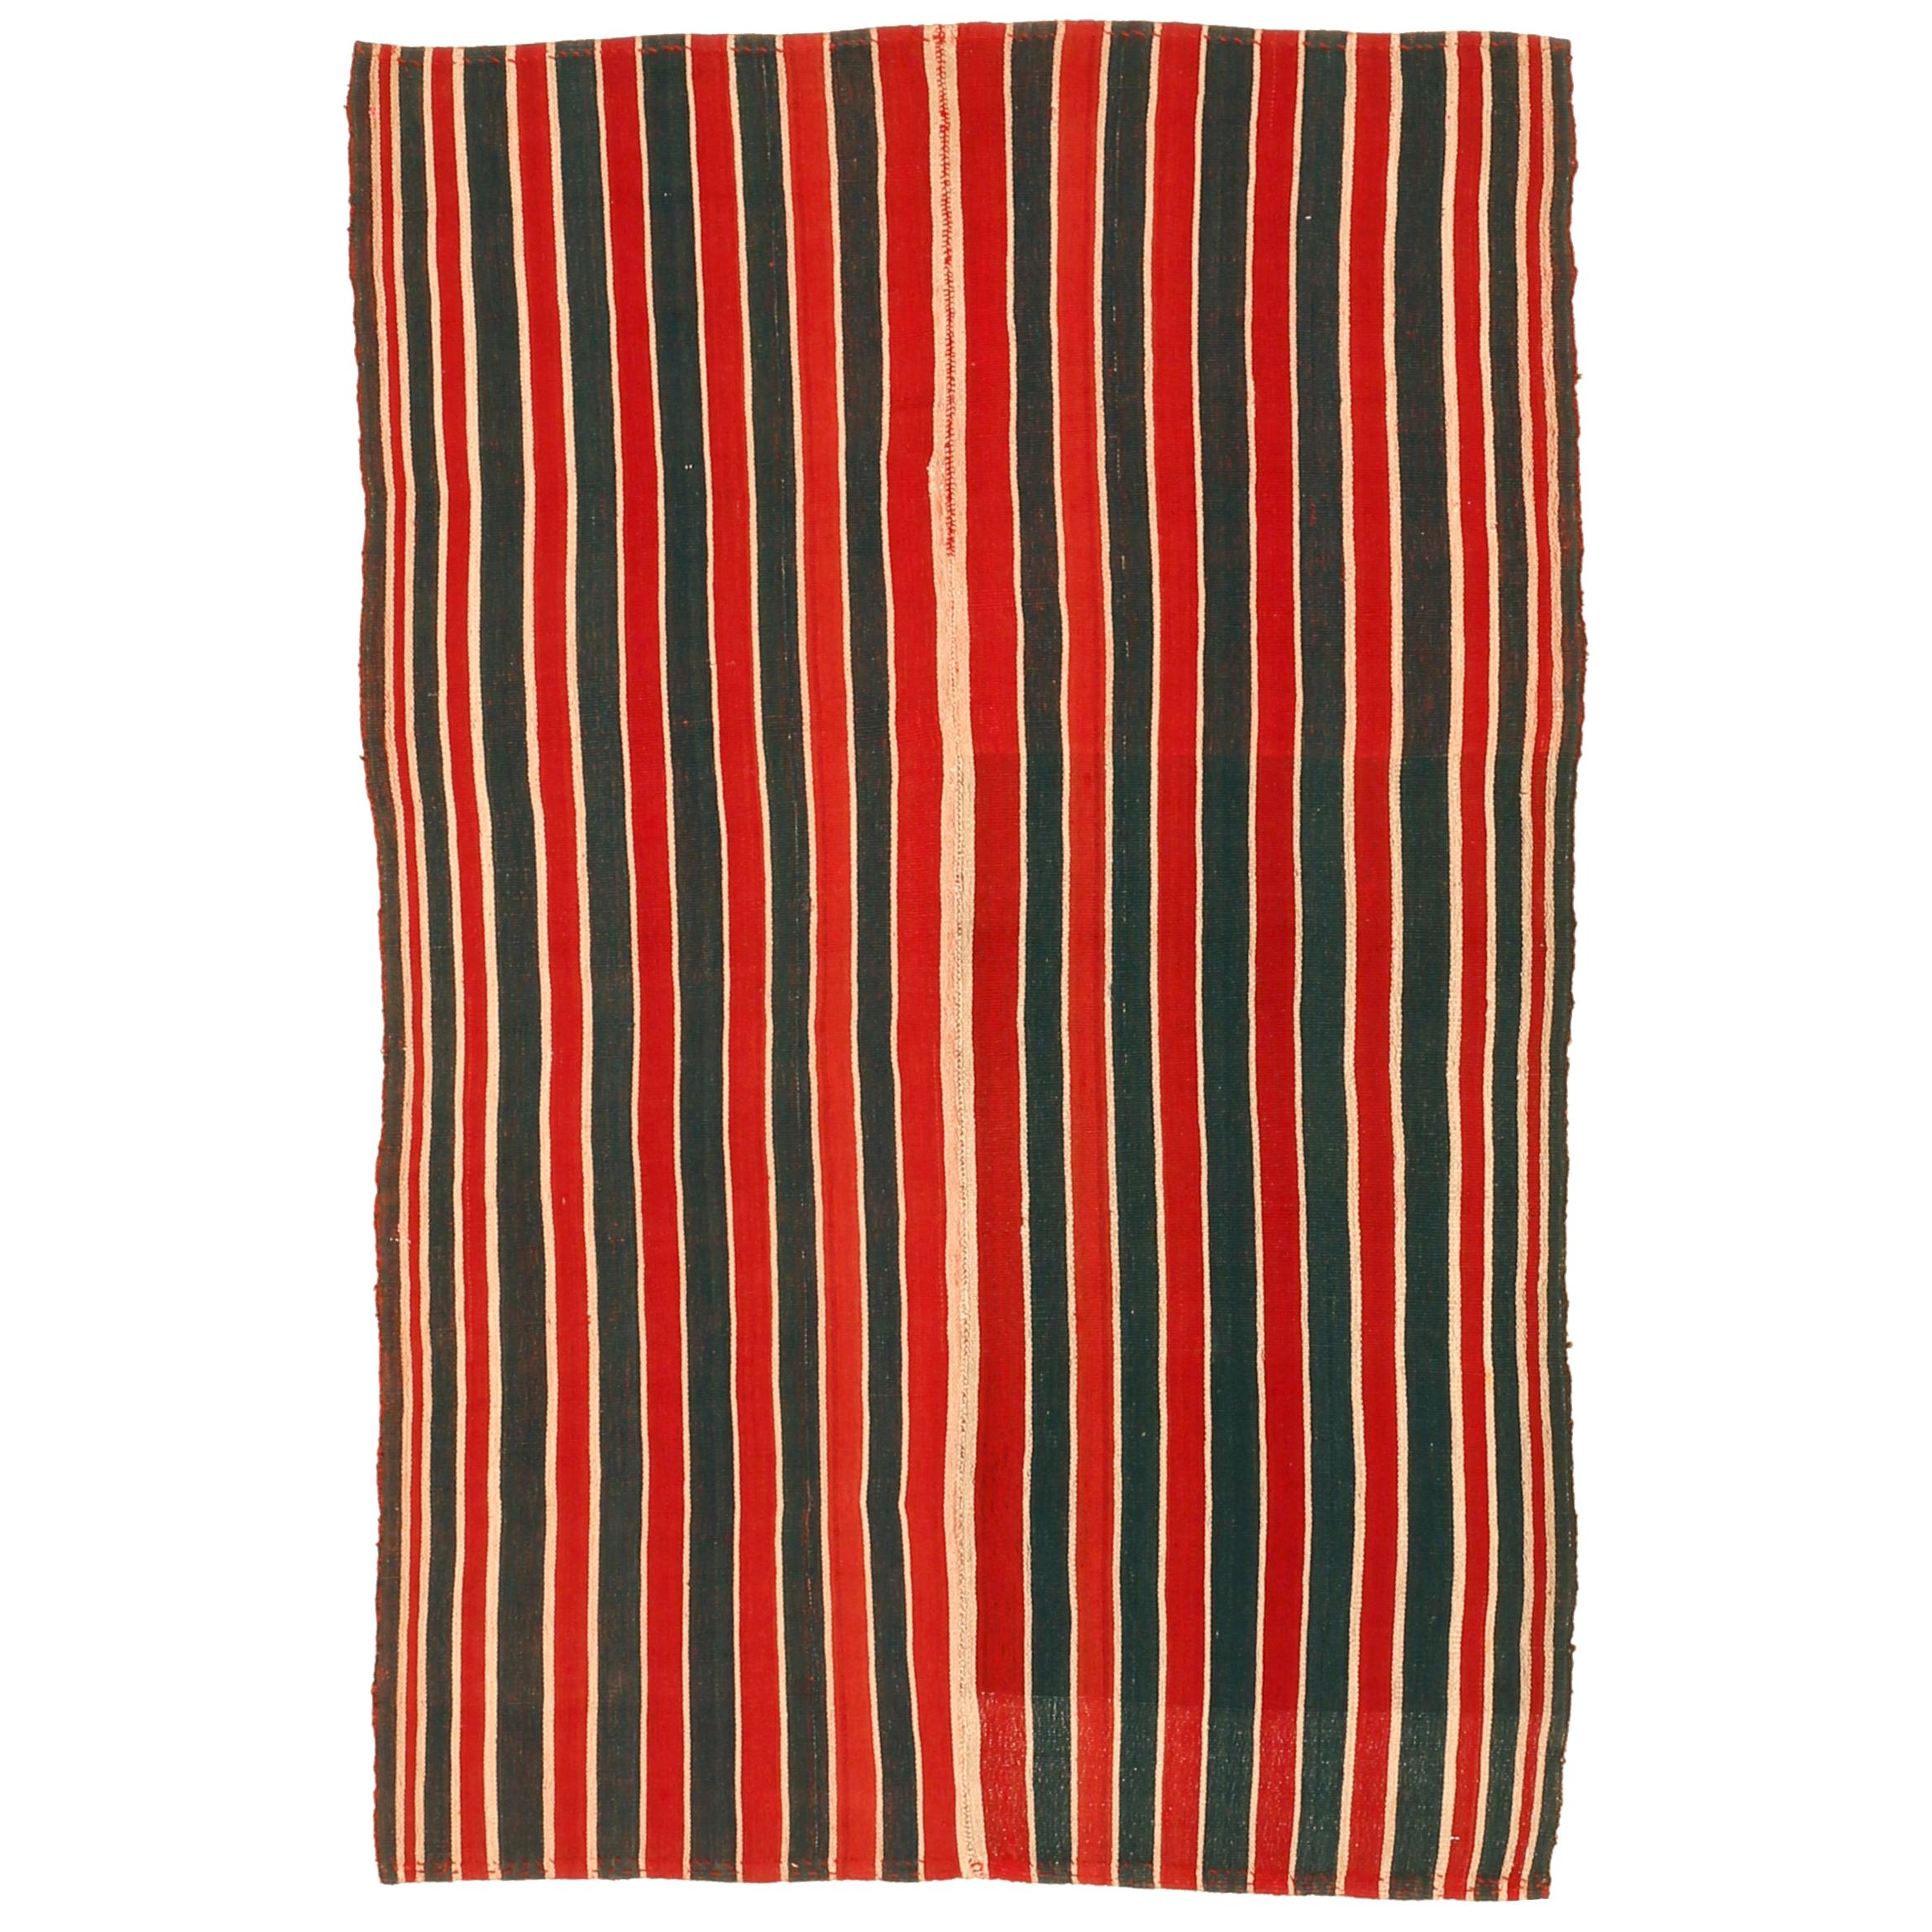 Antique Minimalist Jajim Flat-Woven Rug with Vertical Green/Red Stripes